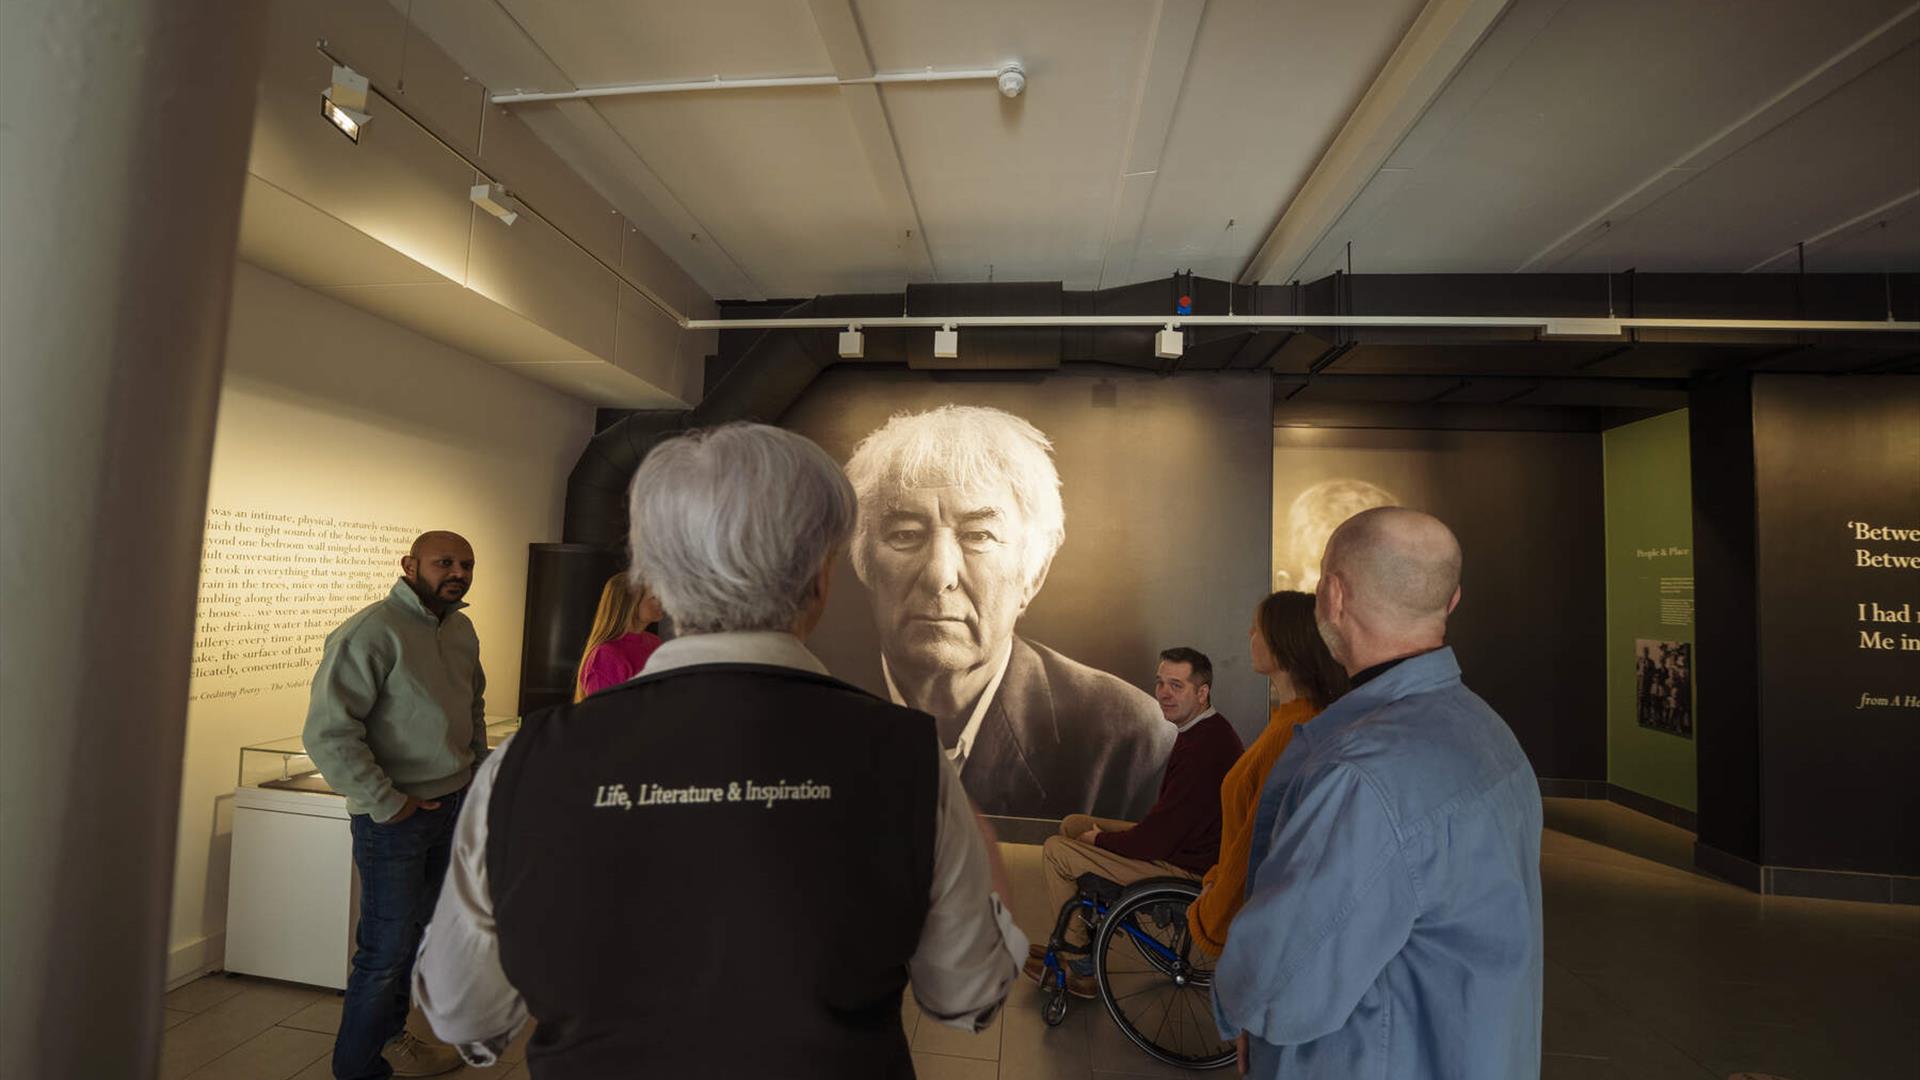 A photograph of Seamus Heaney is admired by a tour group